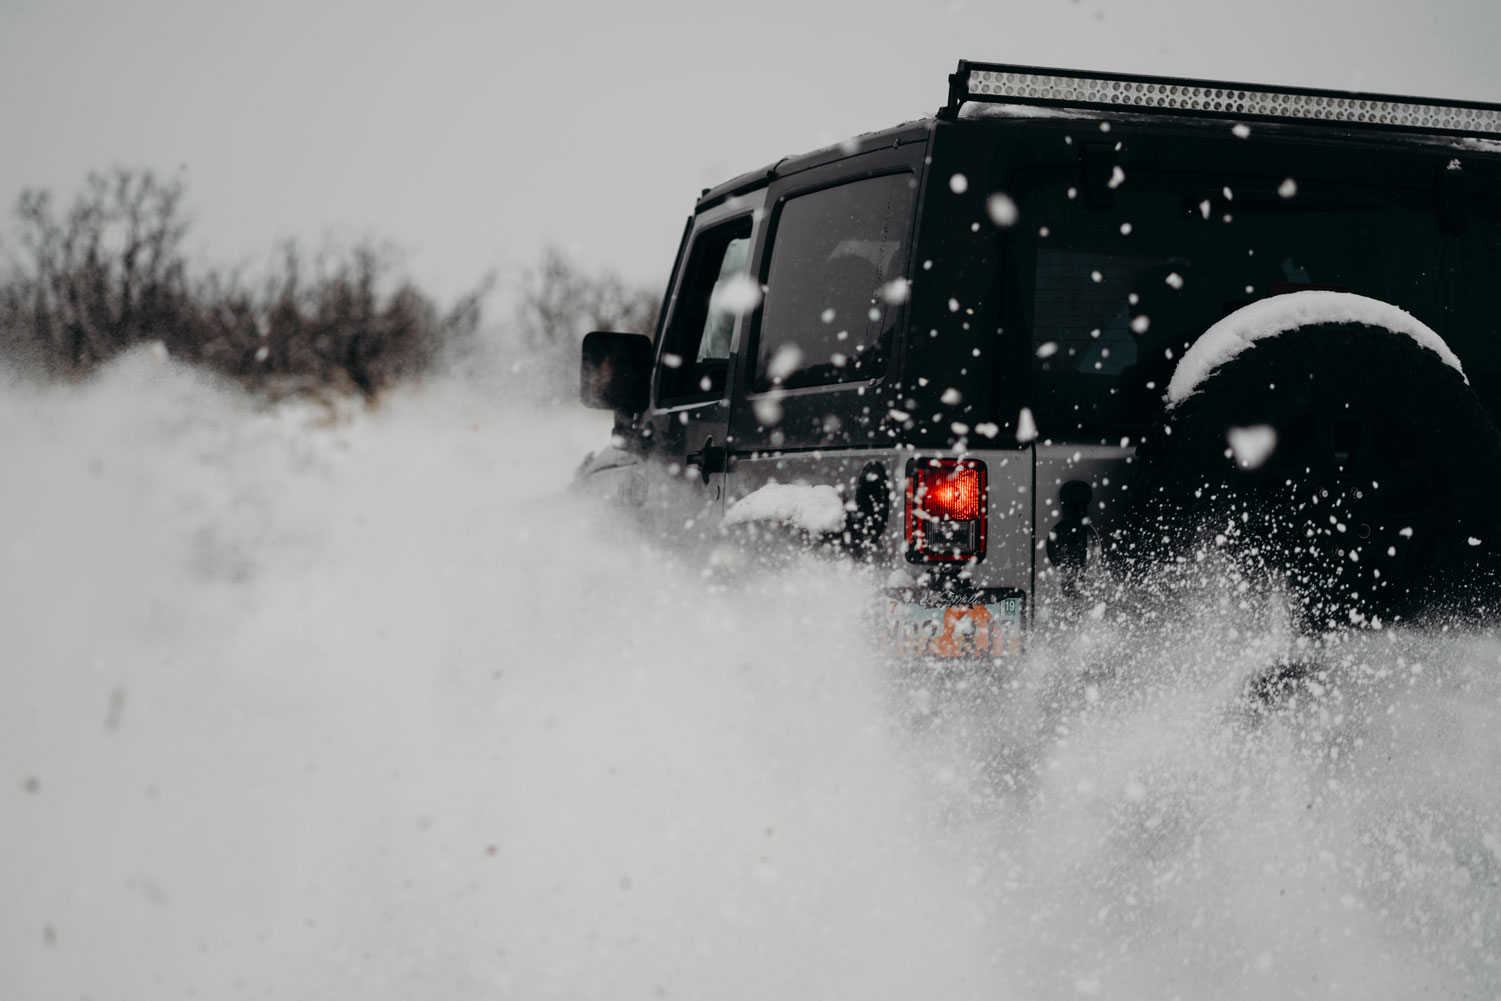 Jeep running through the snow with extra traction because of winter tires